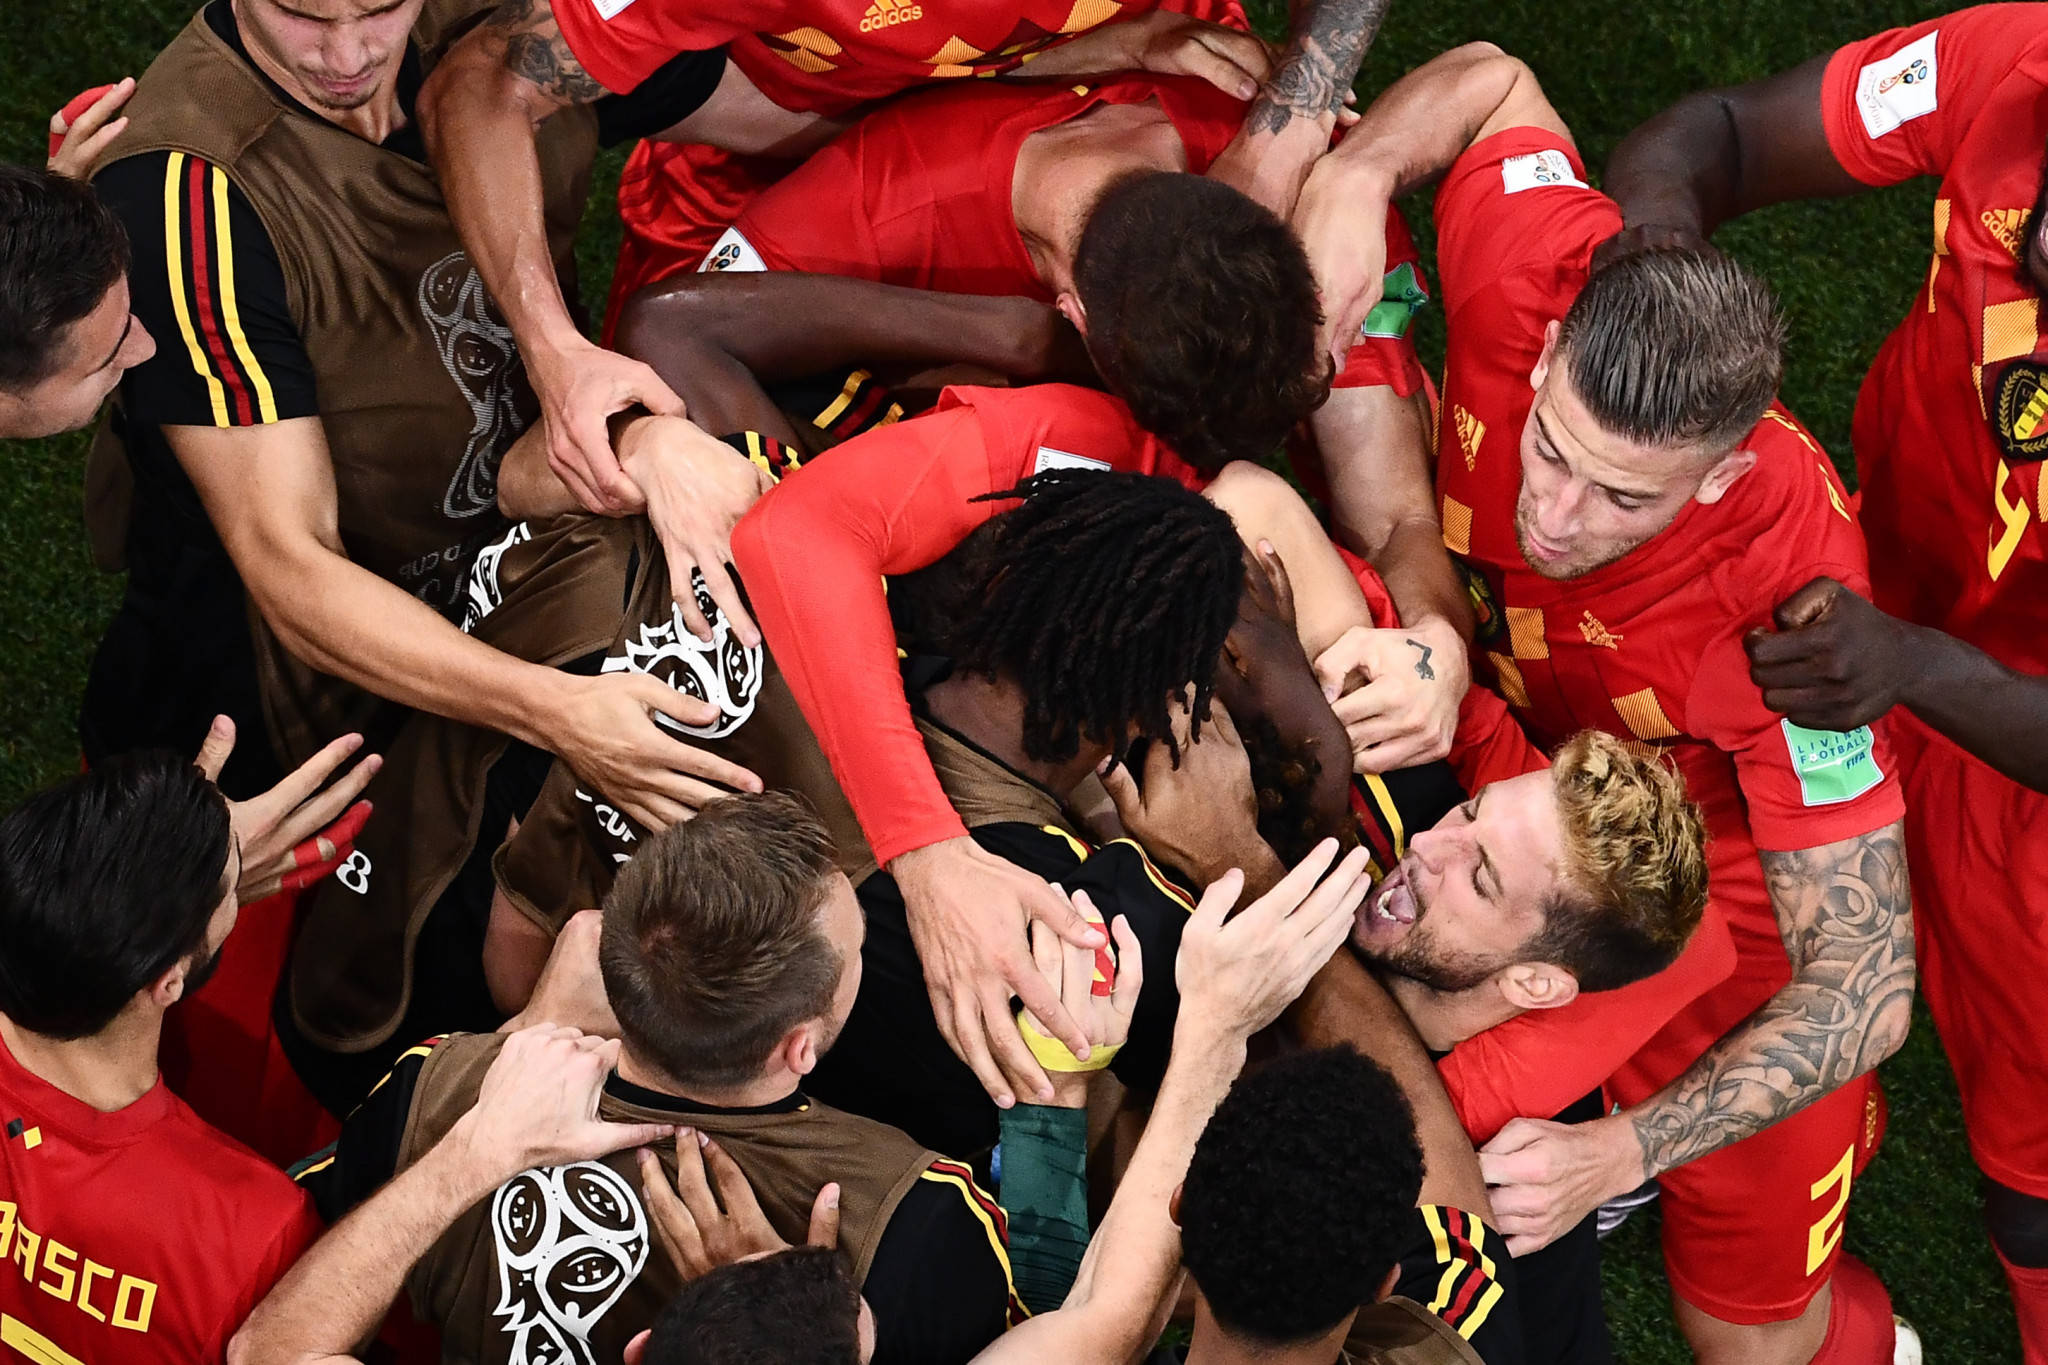 The winning goal sparked wild Belgian celebrations ©Getty Images